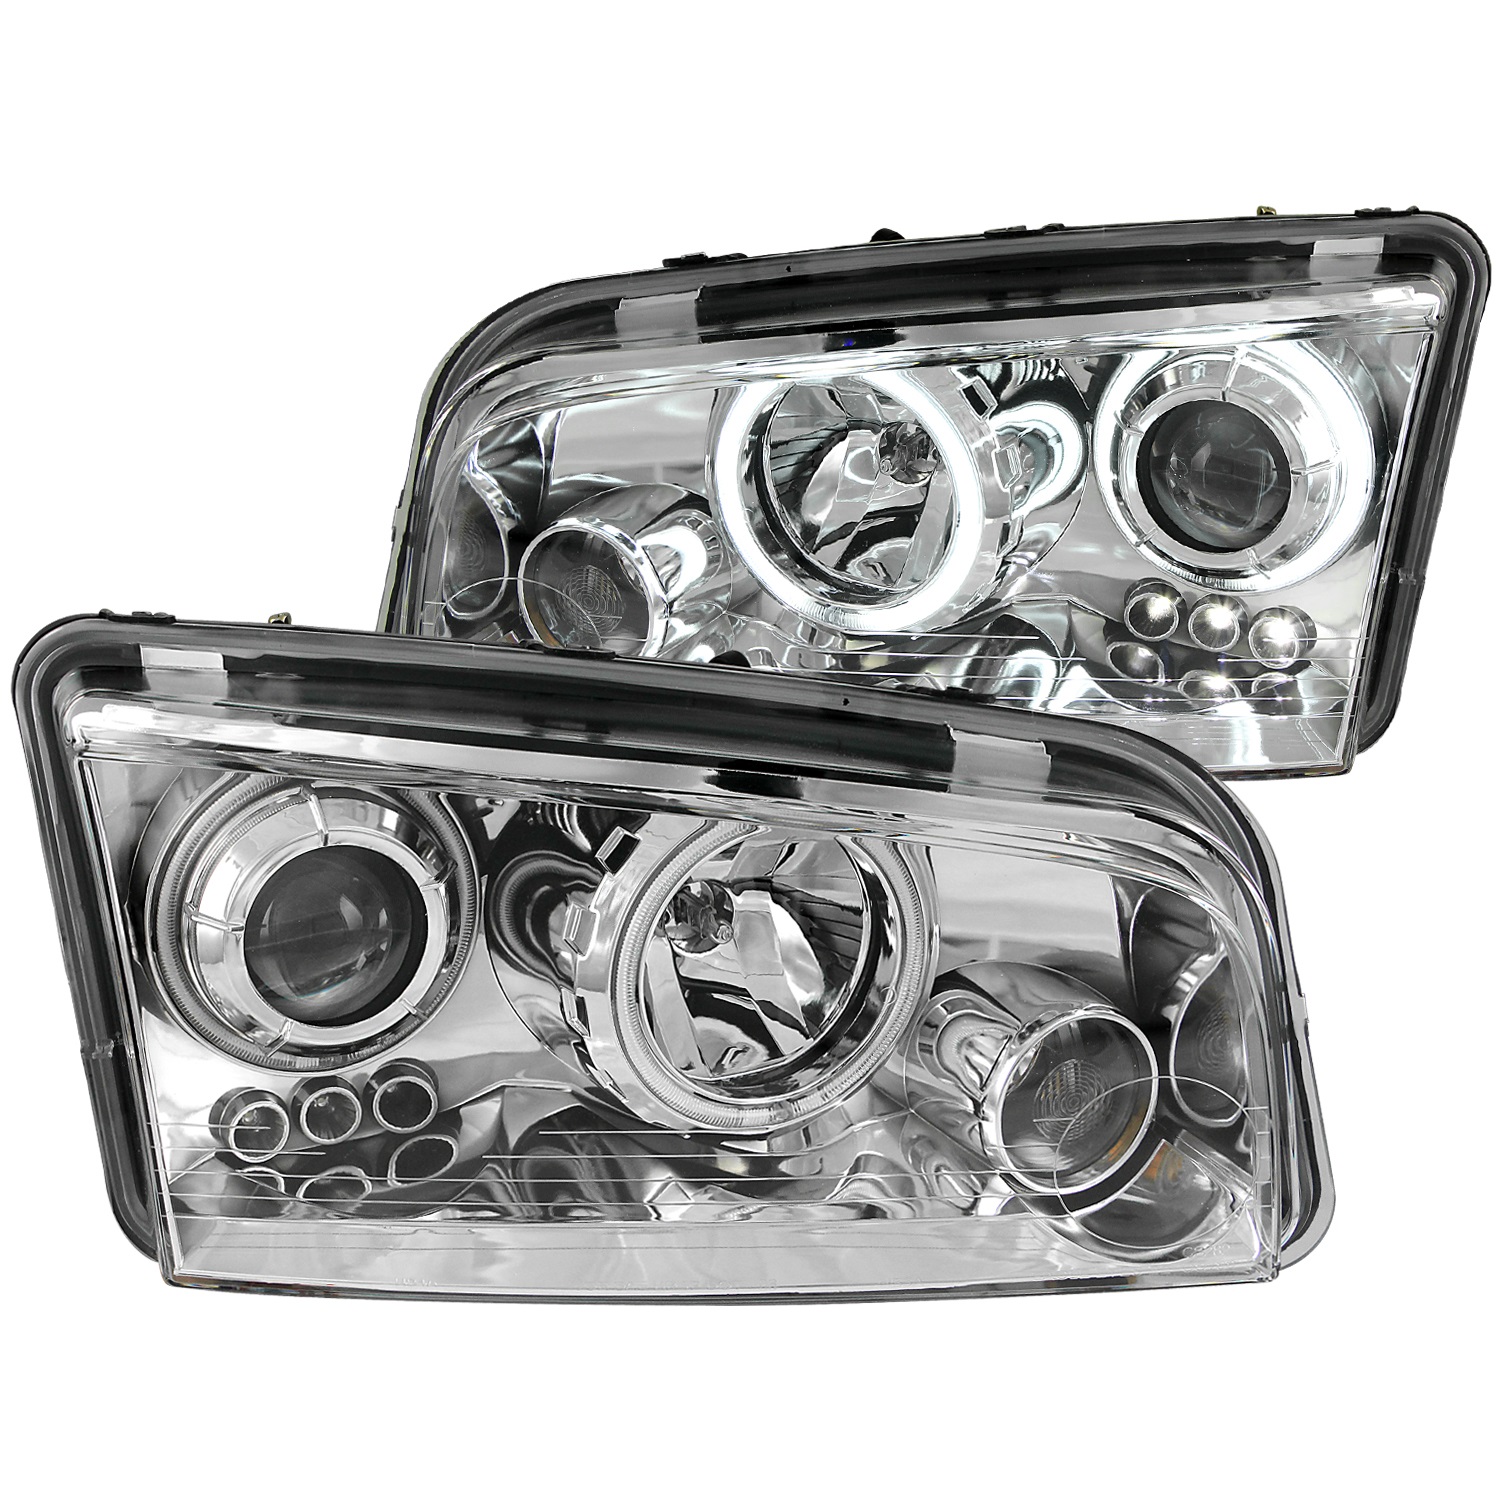 Anzo USA 121382 Projector Headlight Set w/Halo Fits 06-10 Charger